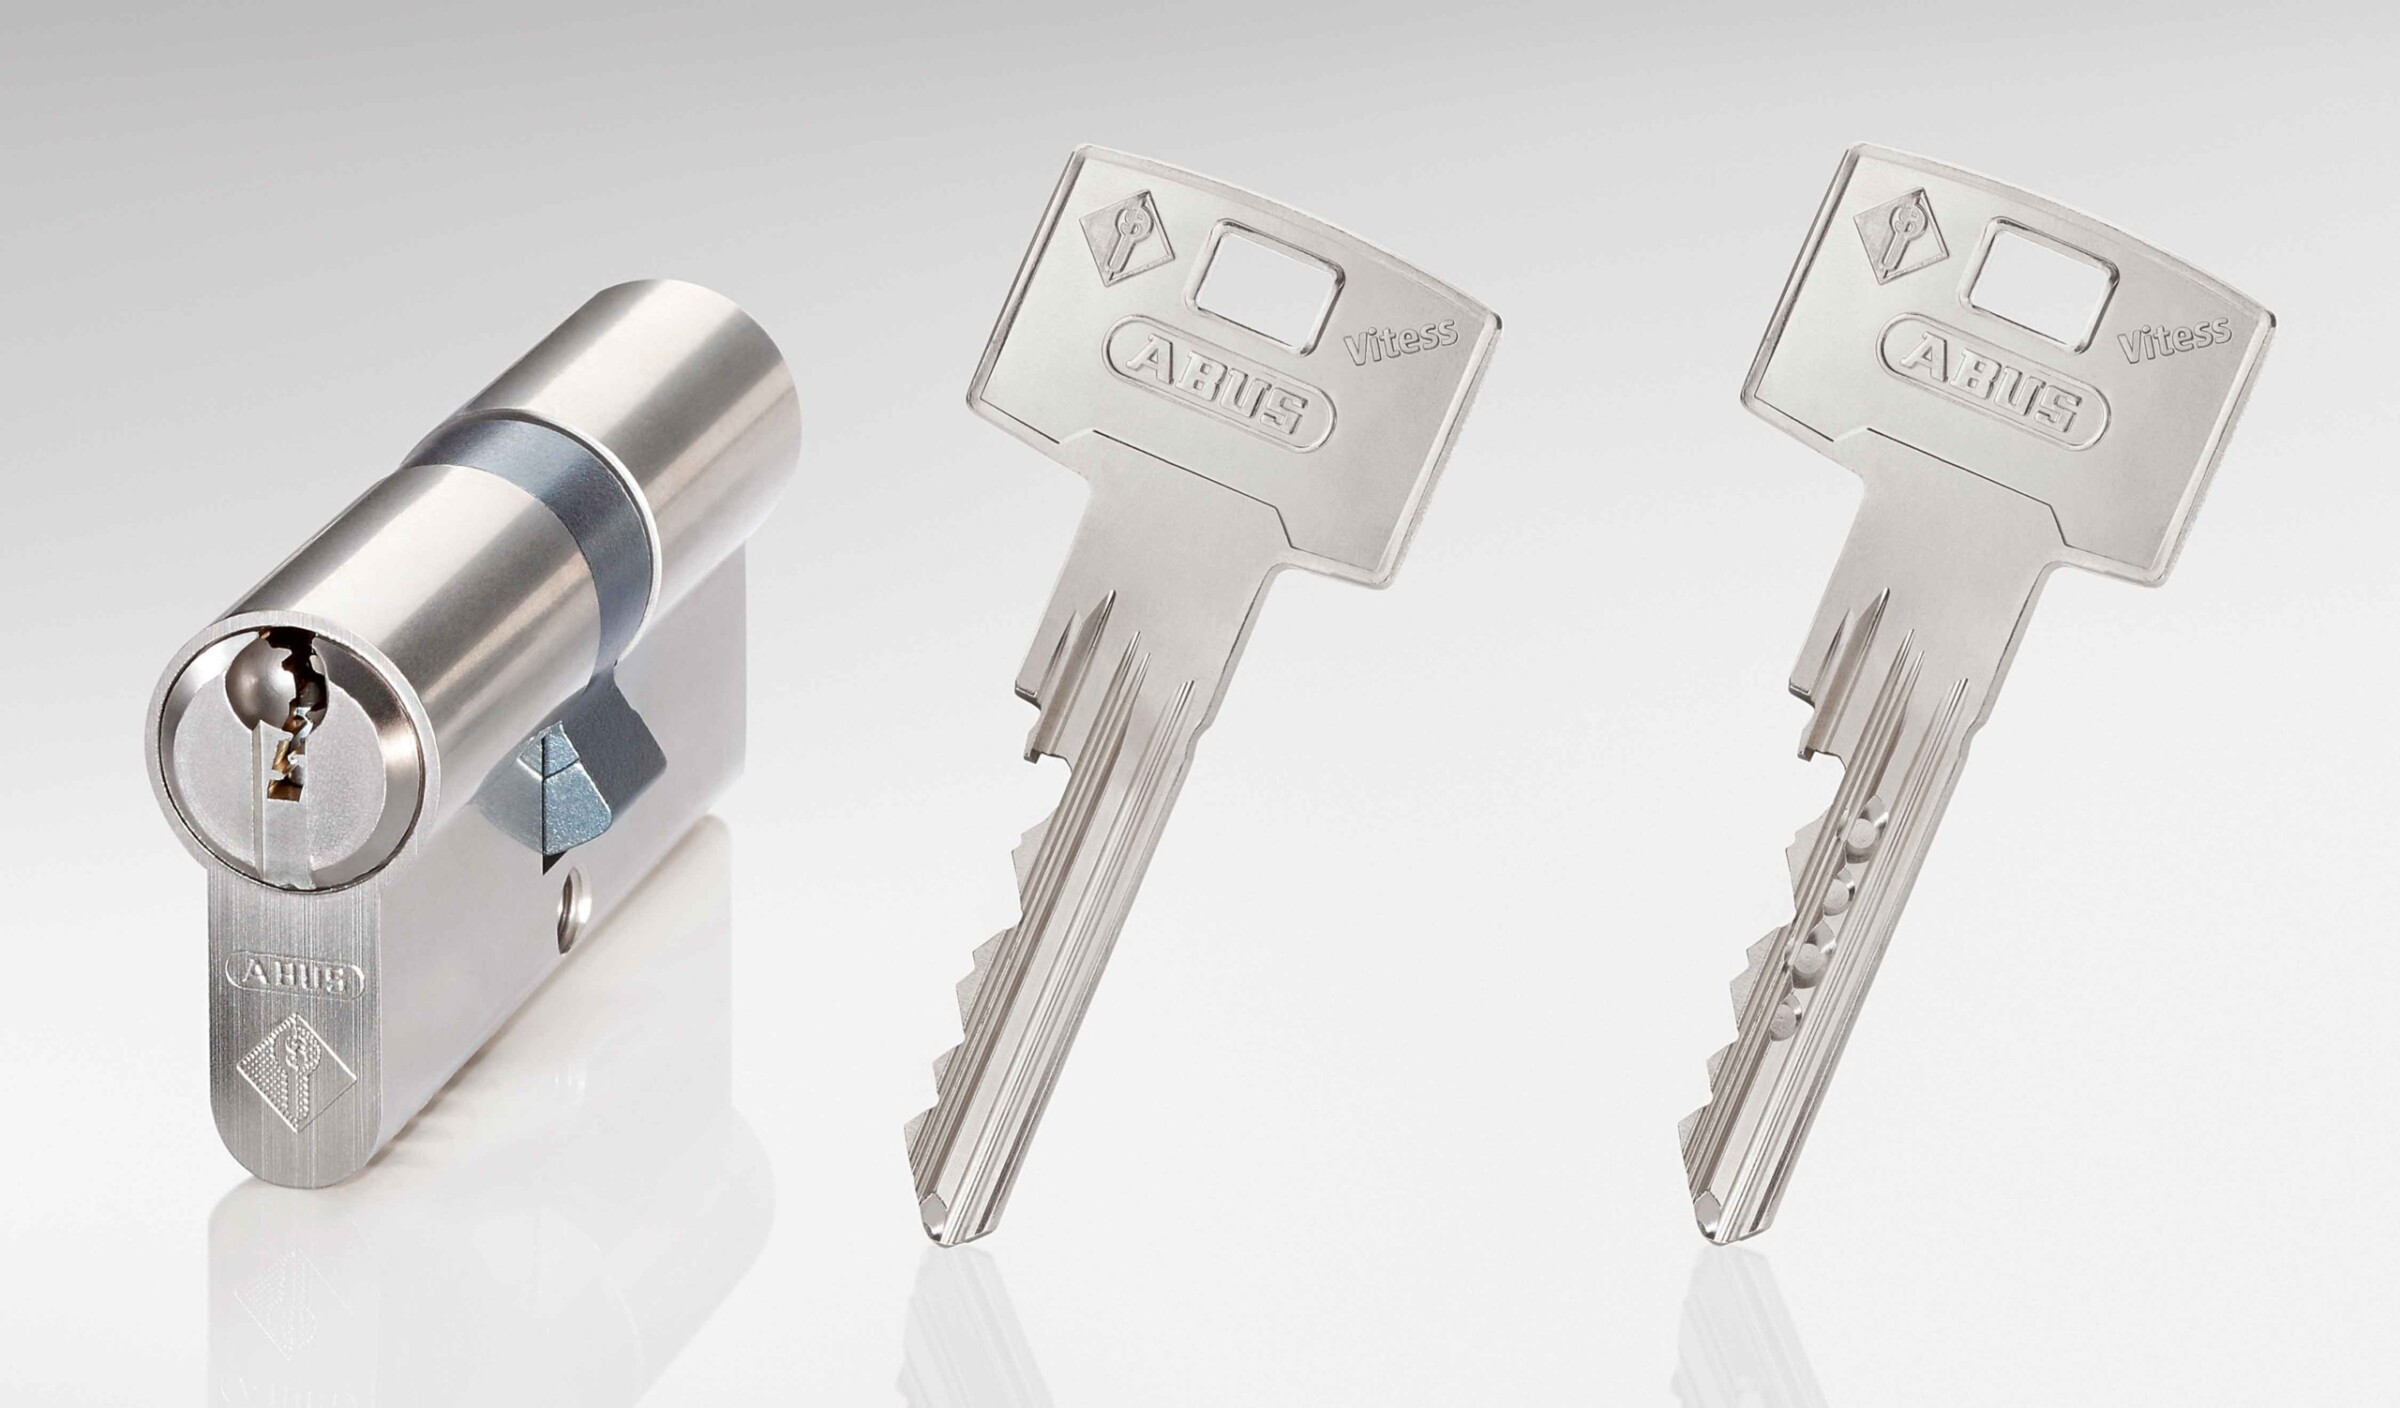 Thanks to its integrated test units and its multiple paracentric curved profile, the Vitess locking system from ABUS provides protection from tampering with the cylinder and illegal key copying.